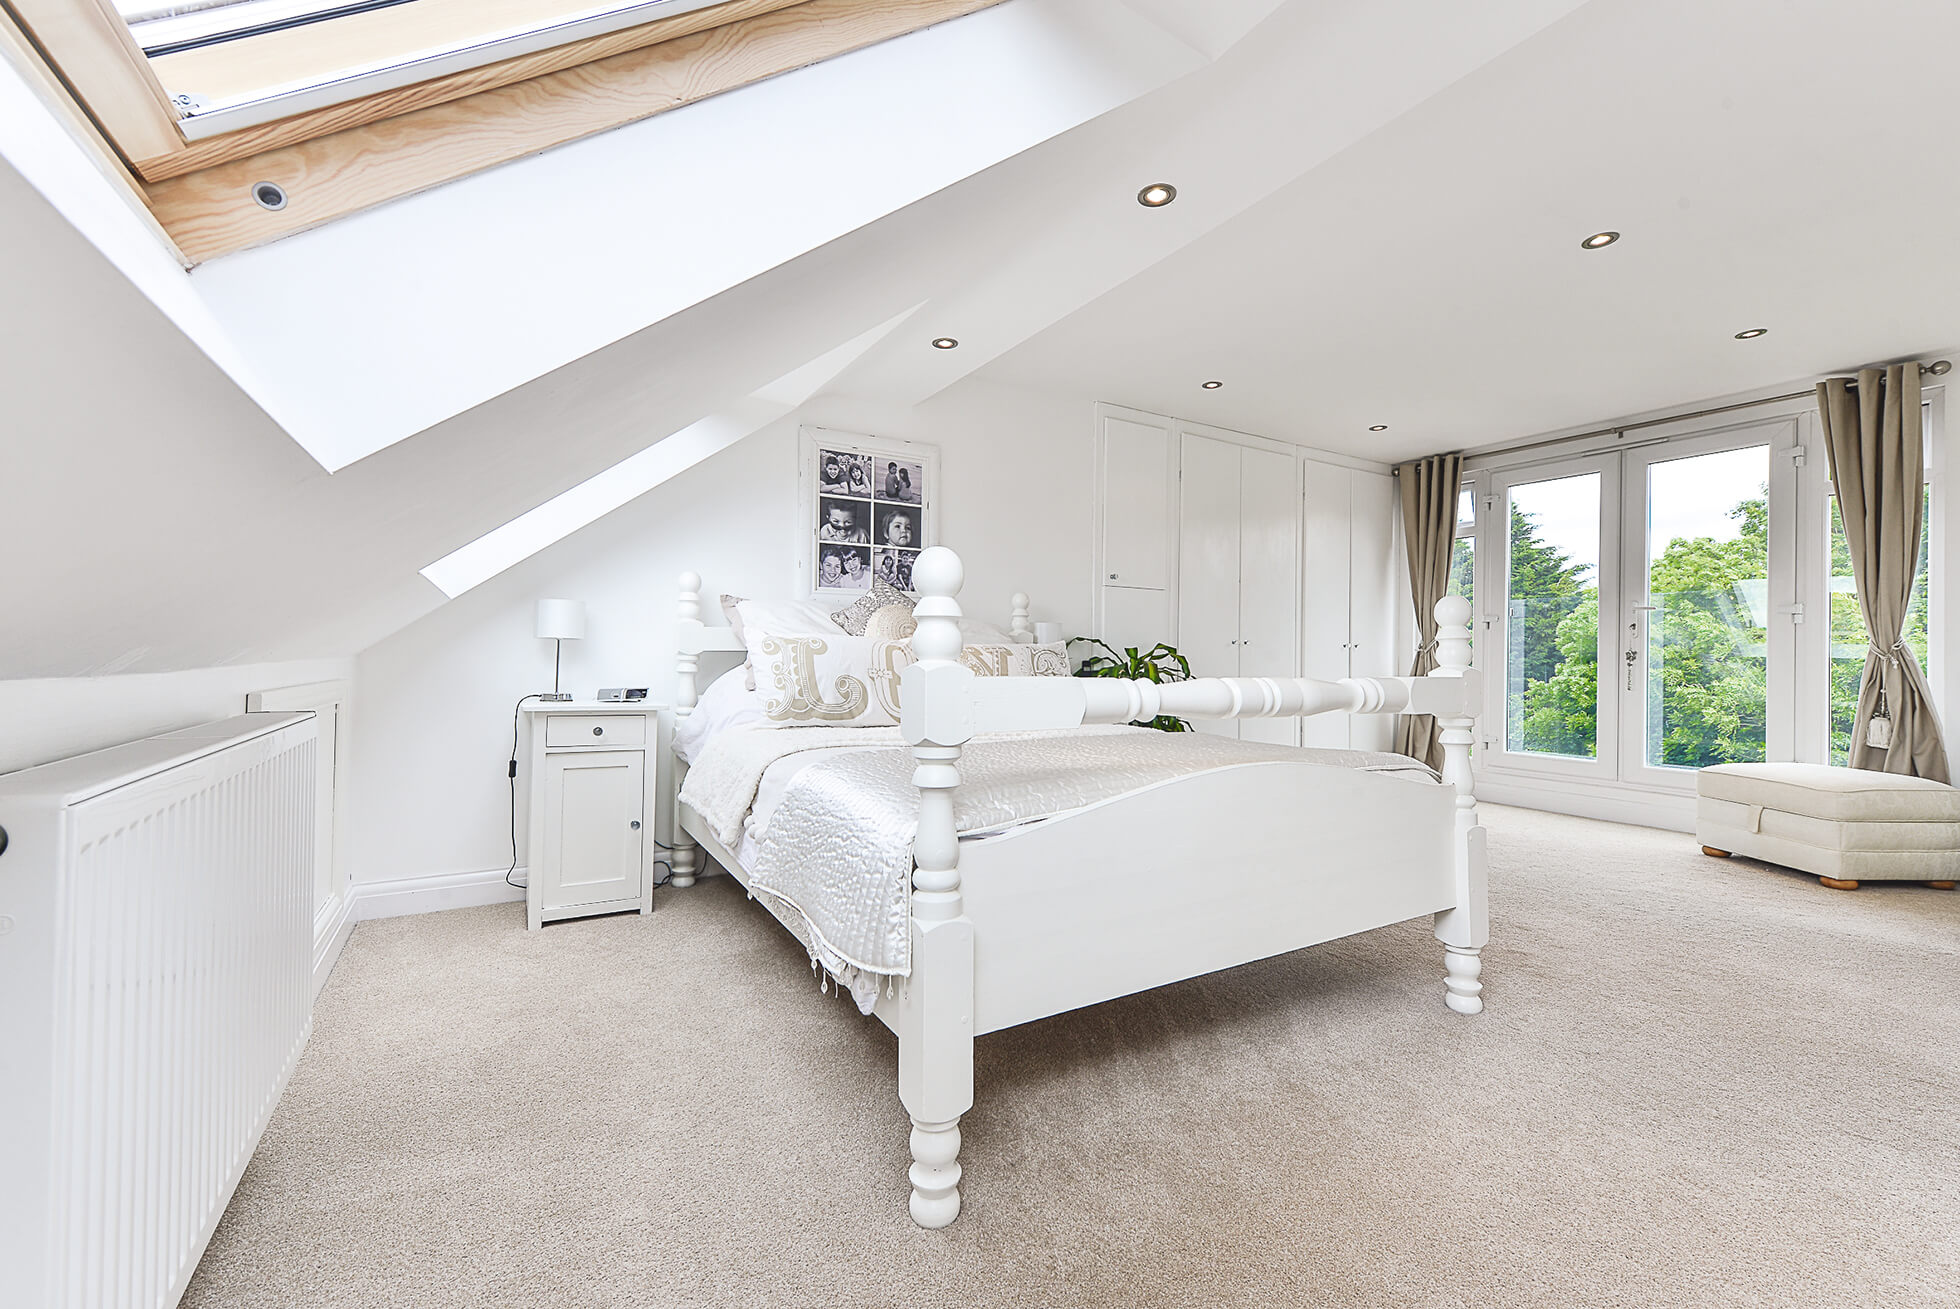 Do you have a question about converting your Loft in North Mymms? Here are the most popular questions asked by our clients.